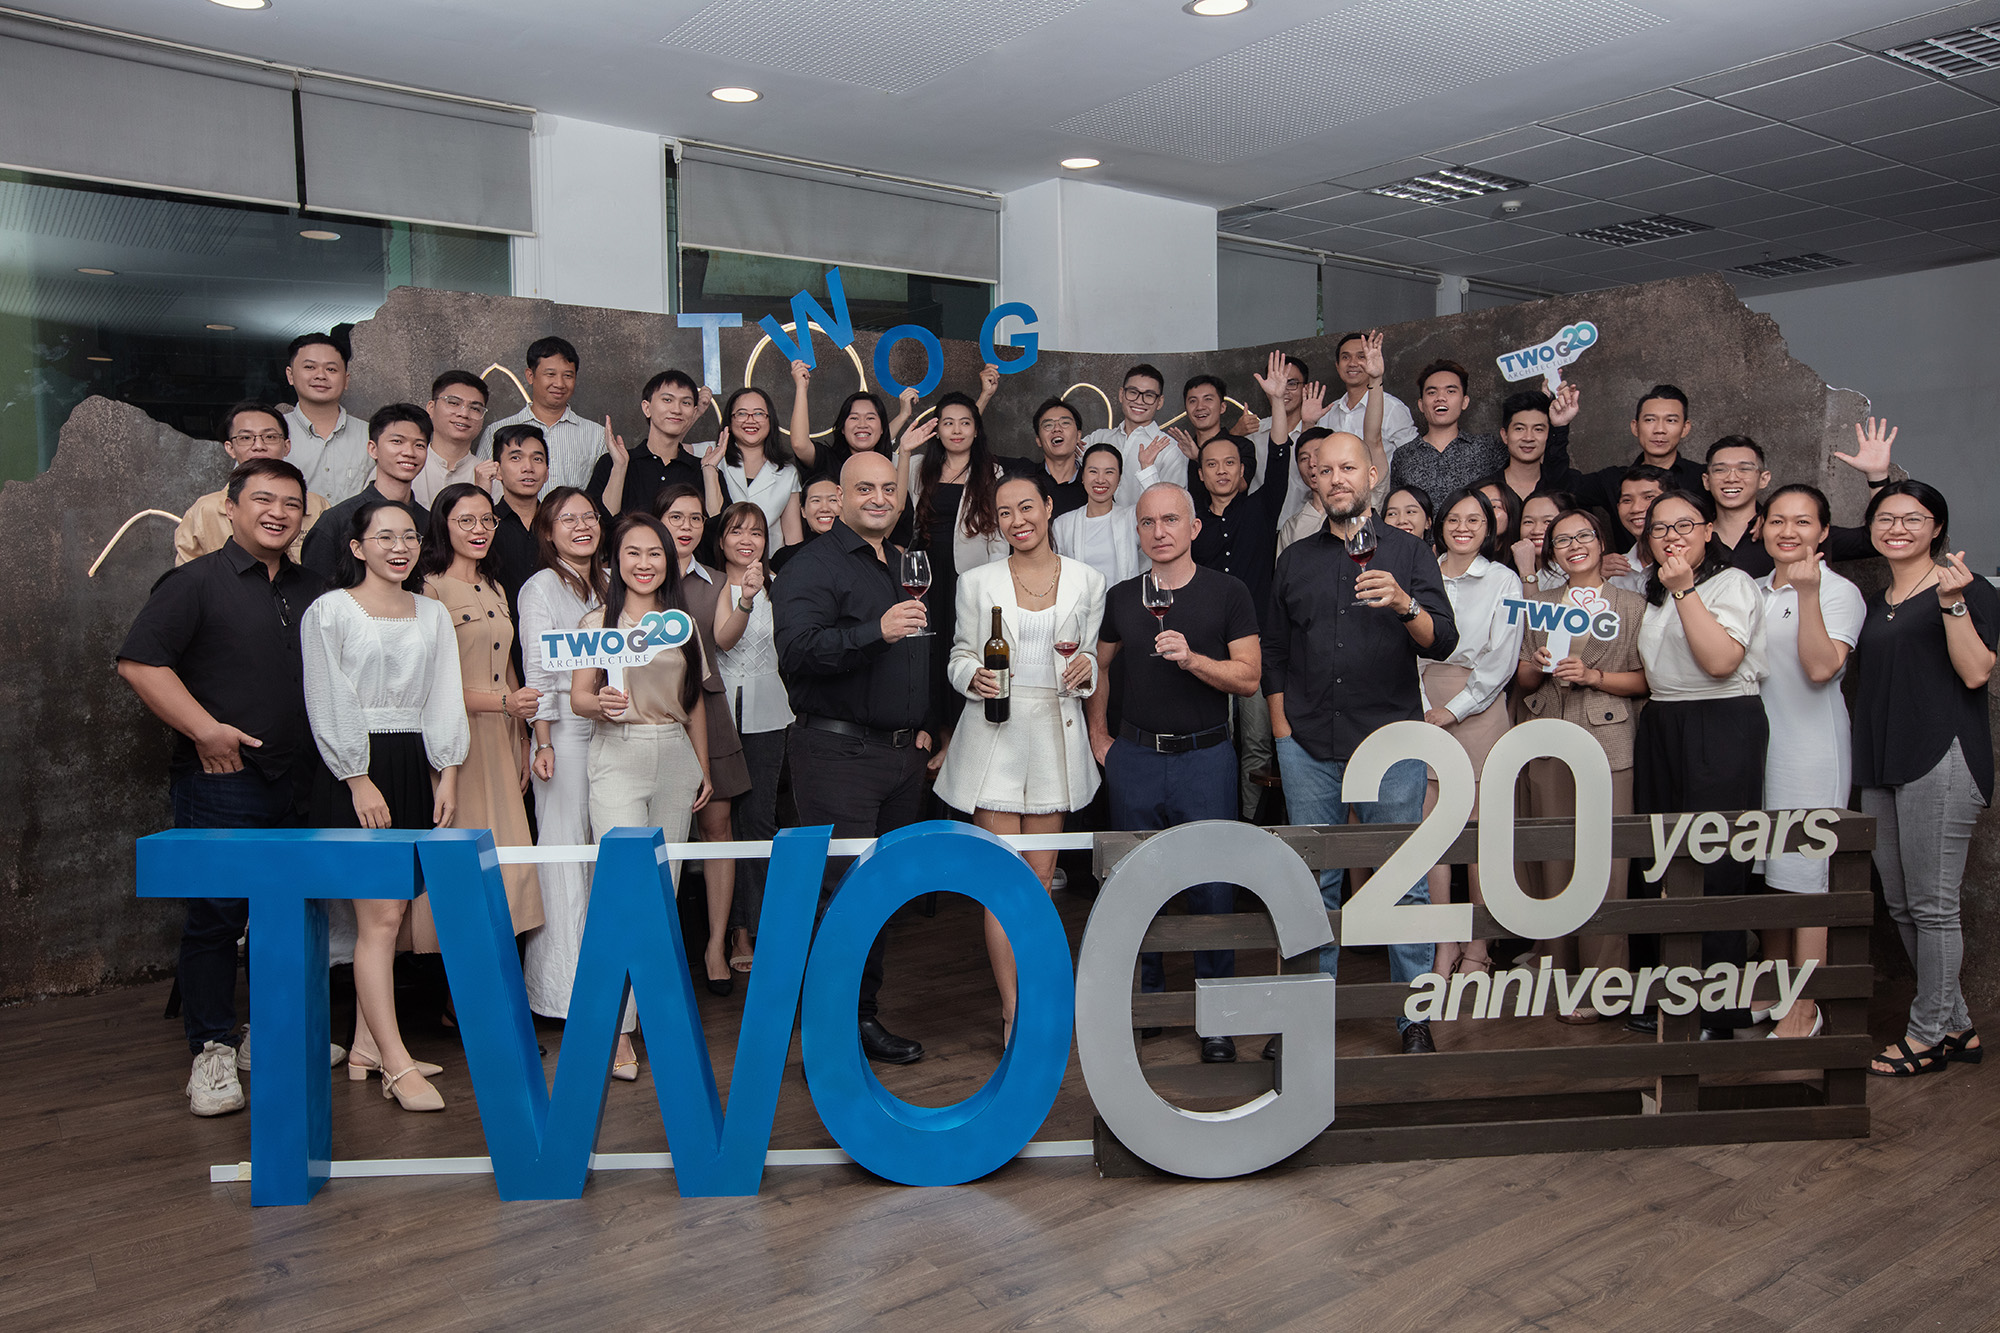 TwoG Architecture is proud to announce our 20th Anniversary, a milestone that signifies our remarkable achievements and significant contributions to the architecture industry.